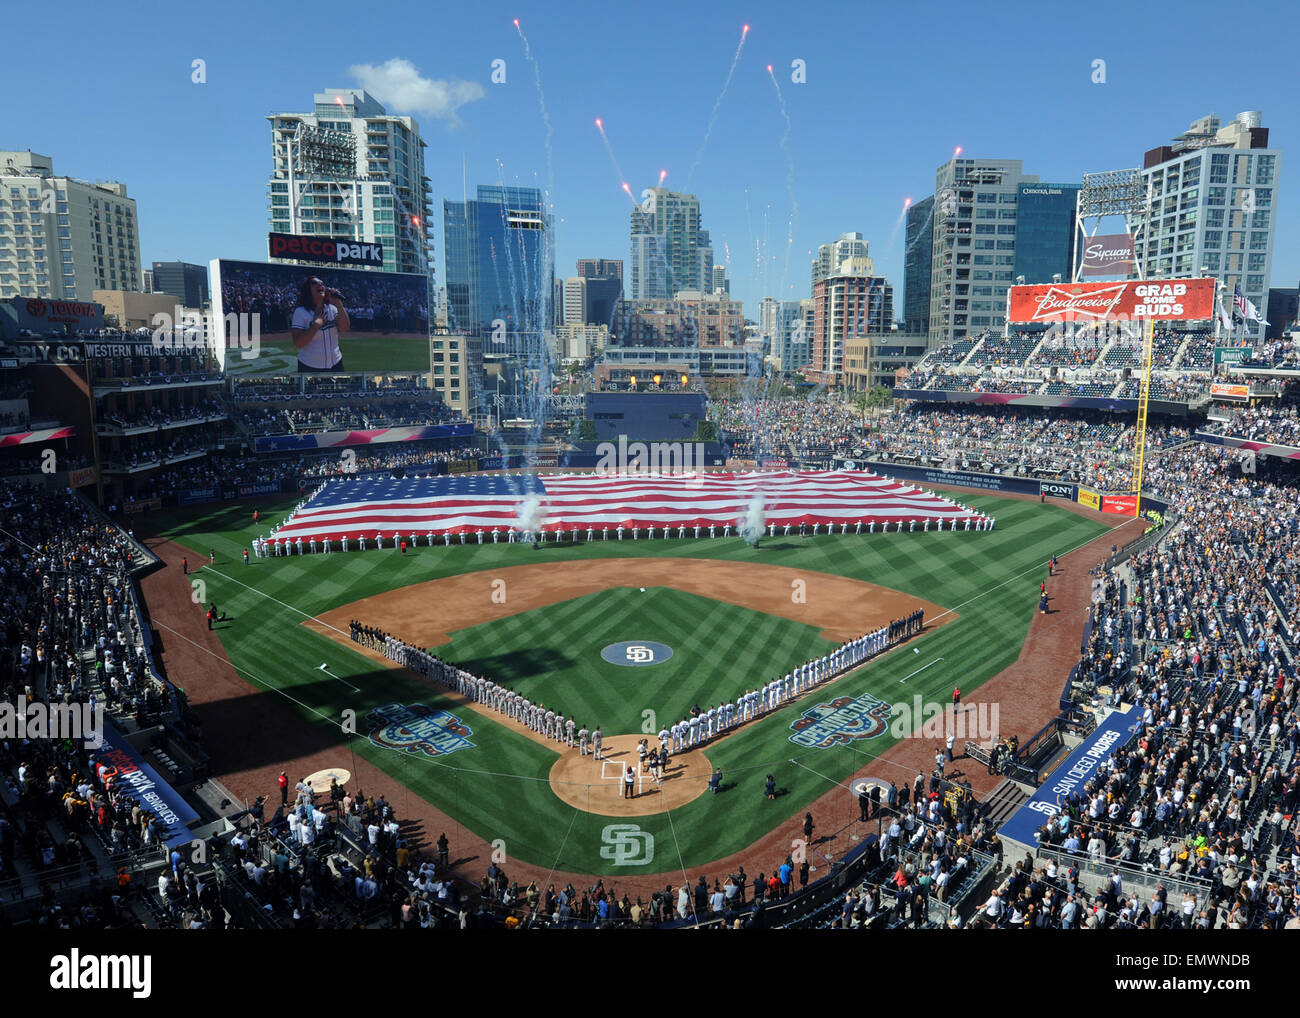 The San Diego Padres professional baseball team celebrate opening day of the season April 9, 2015 in San Diego, California. Stock Photo